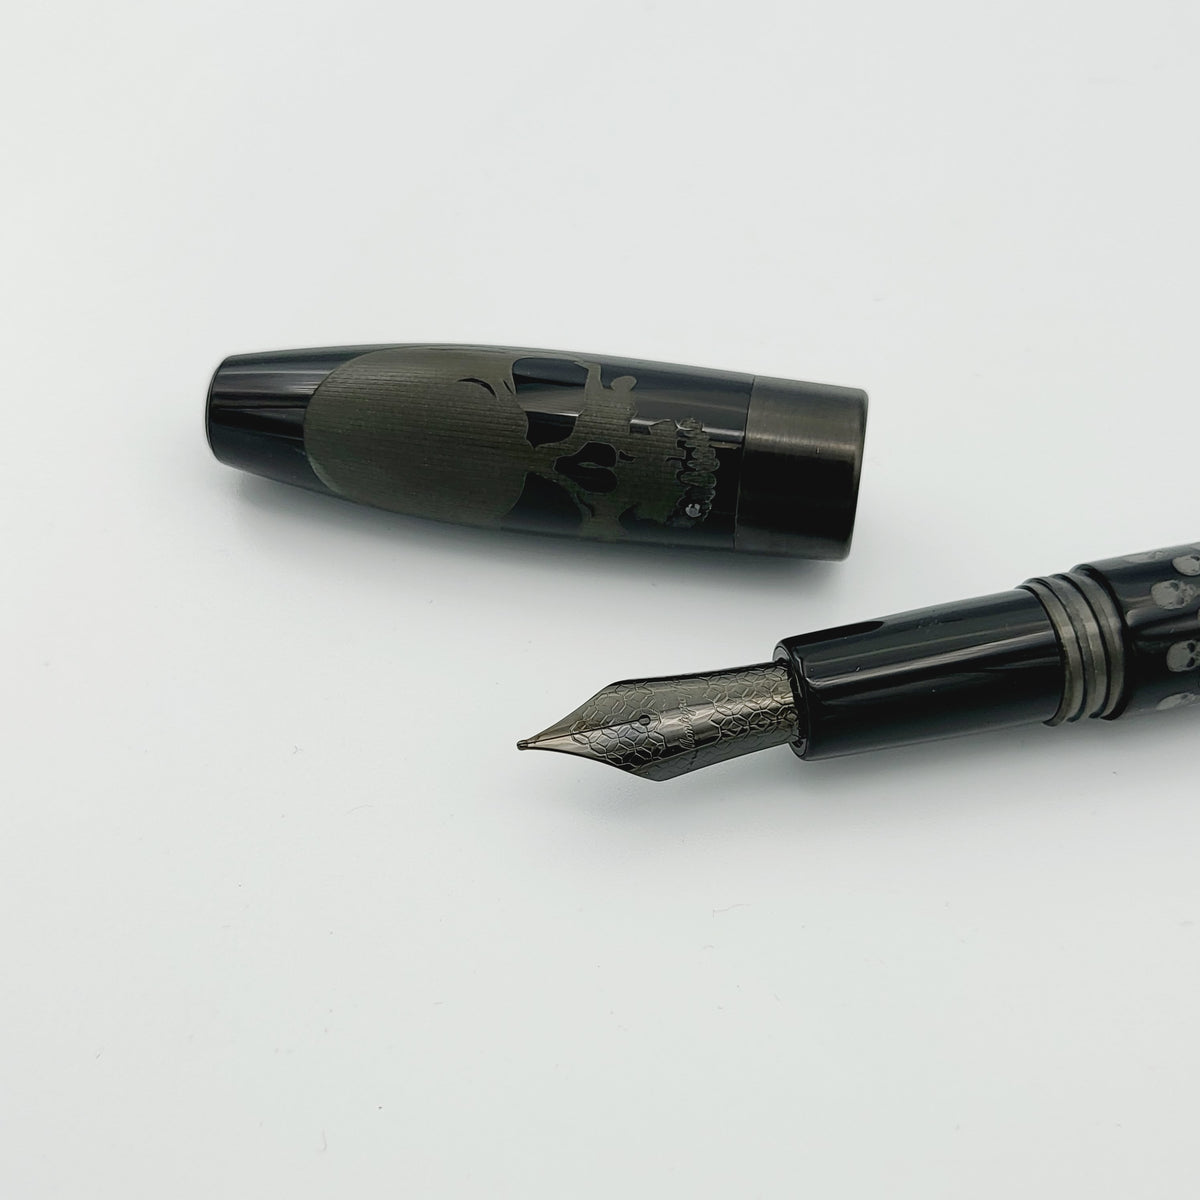 Montegrappa Fortuna Missing Correct Finial? - Fountain & Dip Pens